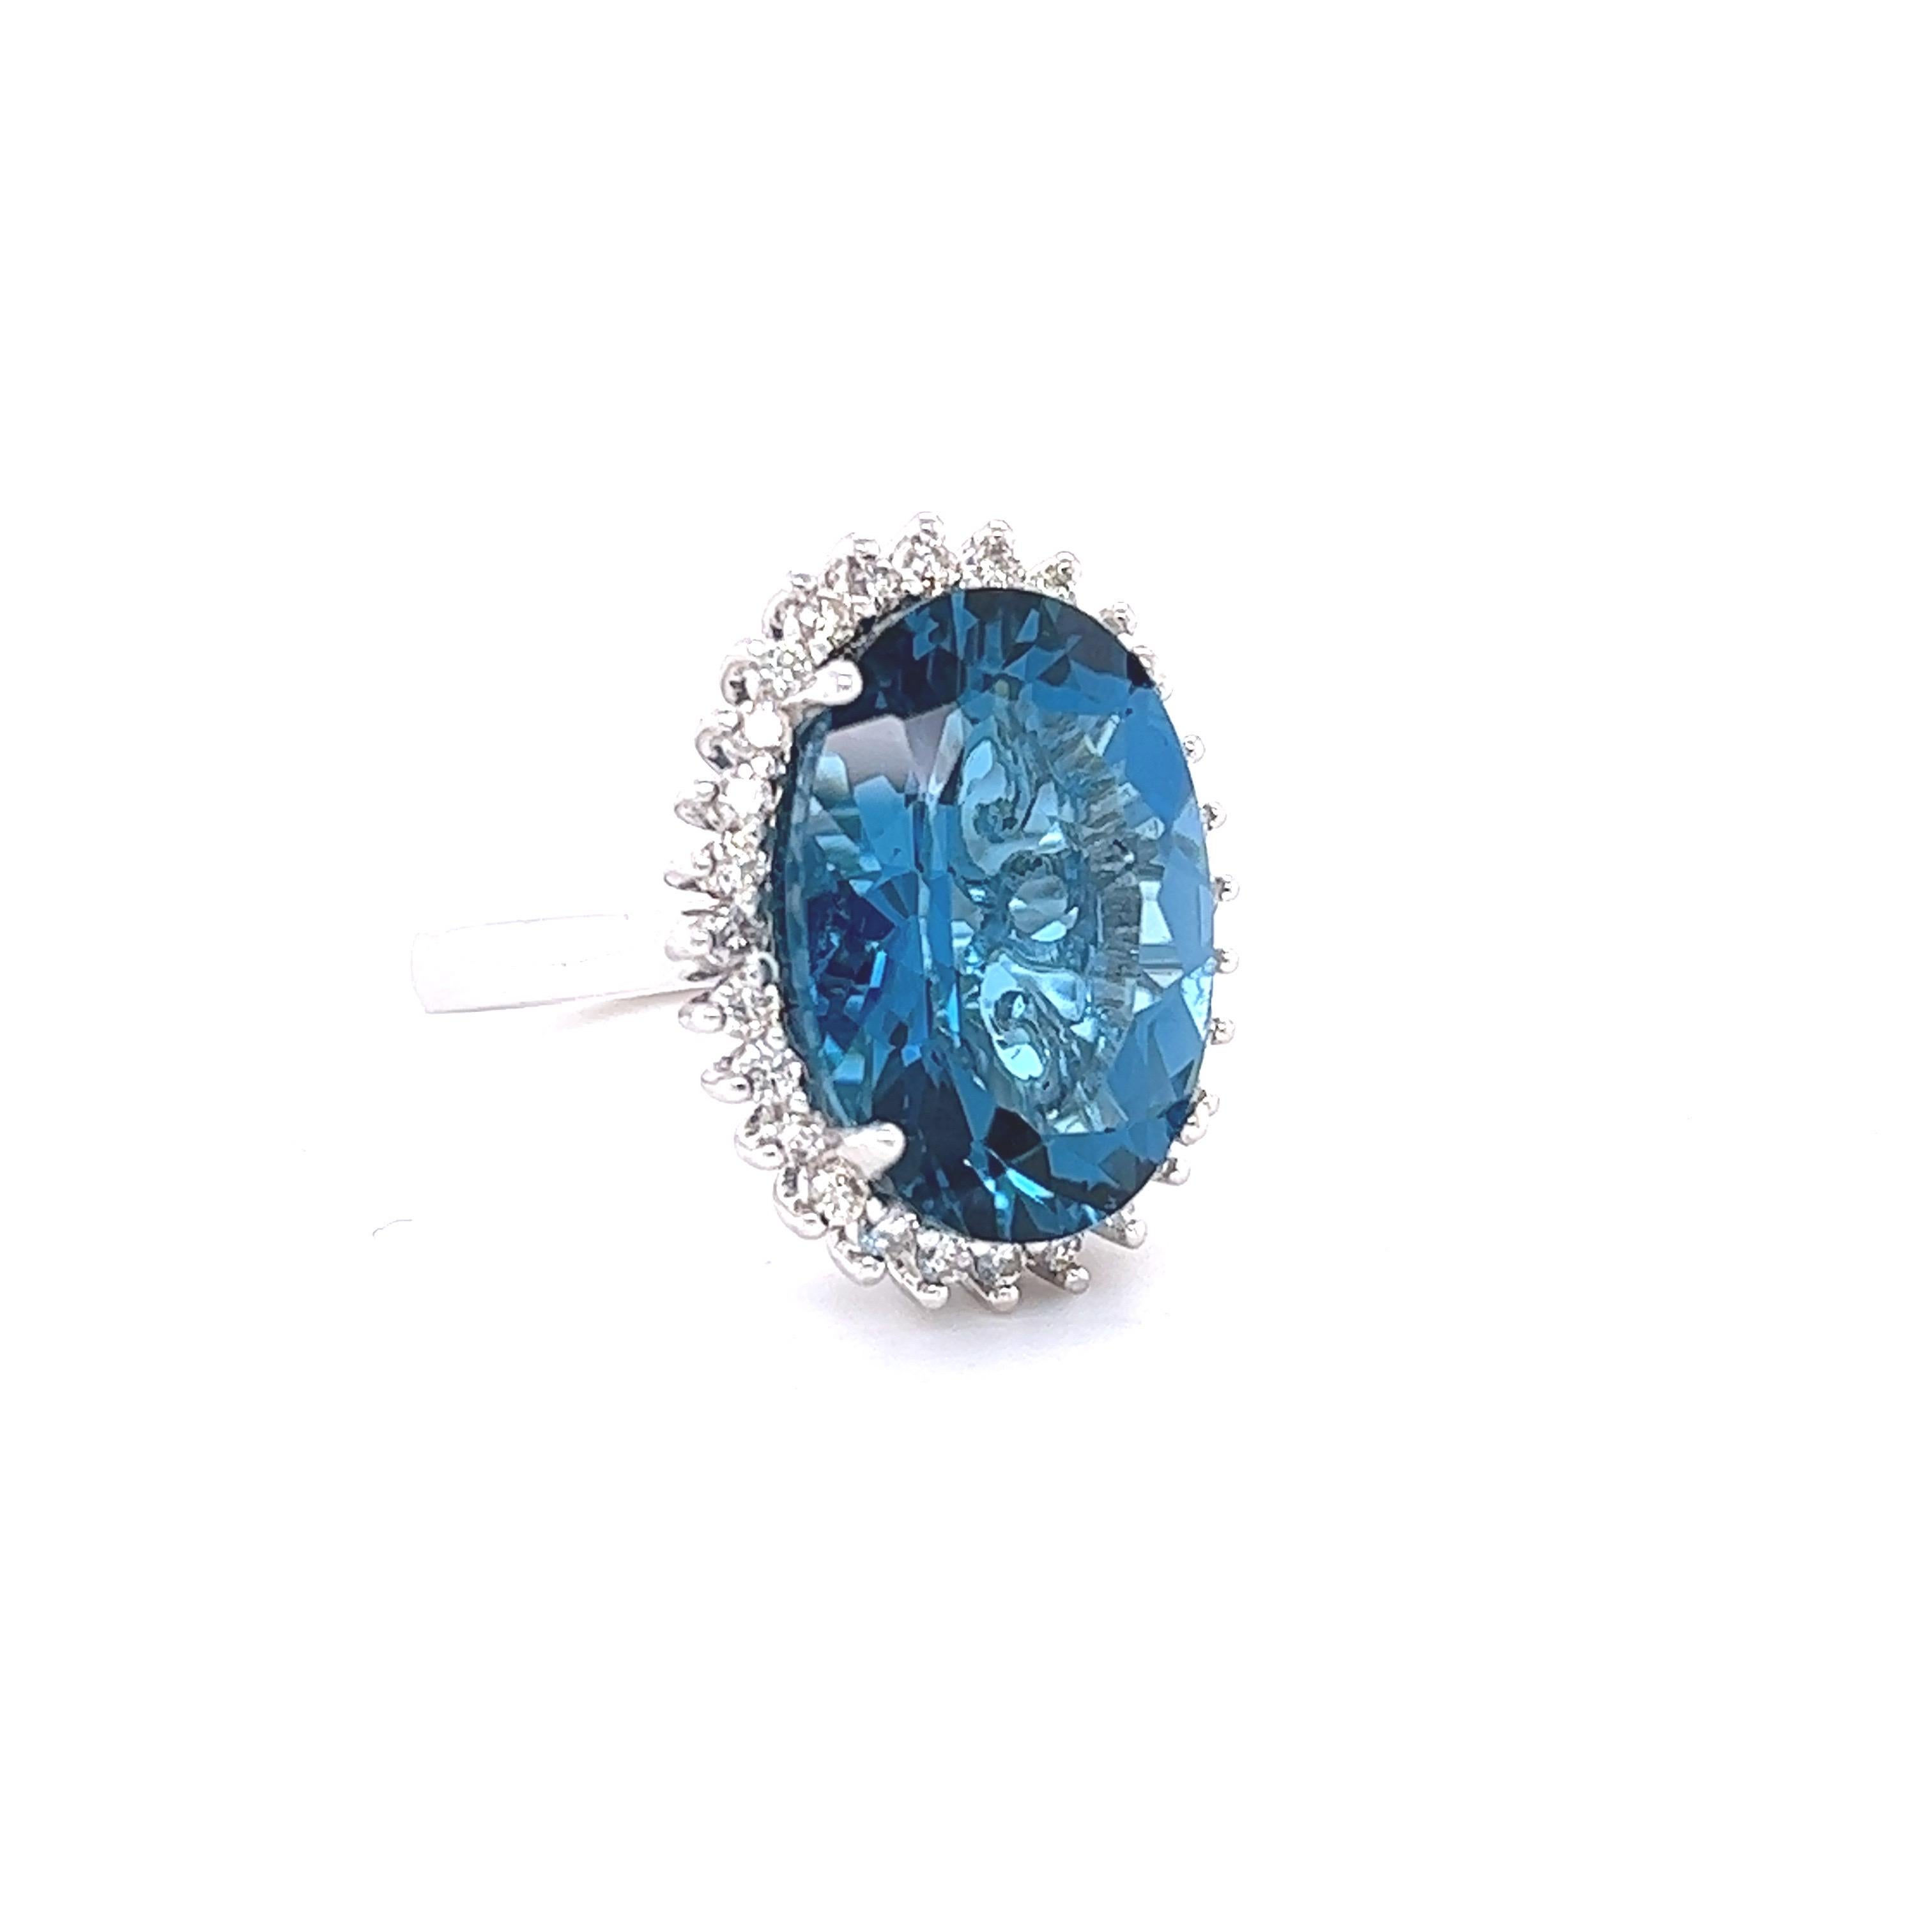 This stunning statement ring has a large Oval Cut Blue Topaz that weighs 13.62 Carats. 
It is surrounded by a simple halo of 28 Round Cut Diamonds that weigh 0.57 Carats. (Clarity: VS, Color: H)

It is crafted in 14 Karat White Gold and weighs